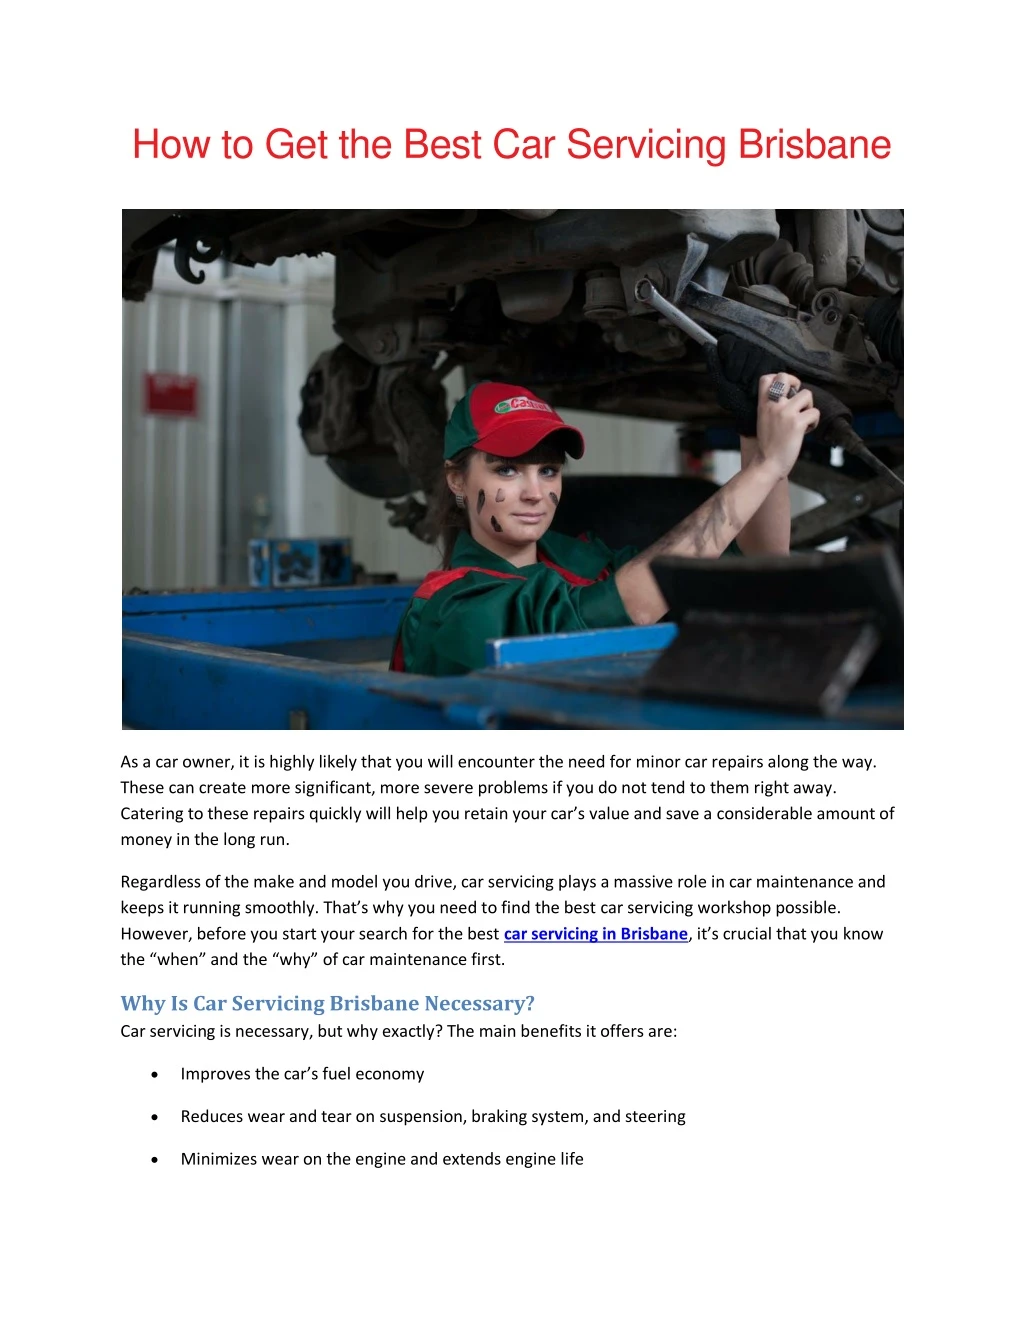 how to get the best car servicing brisbane